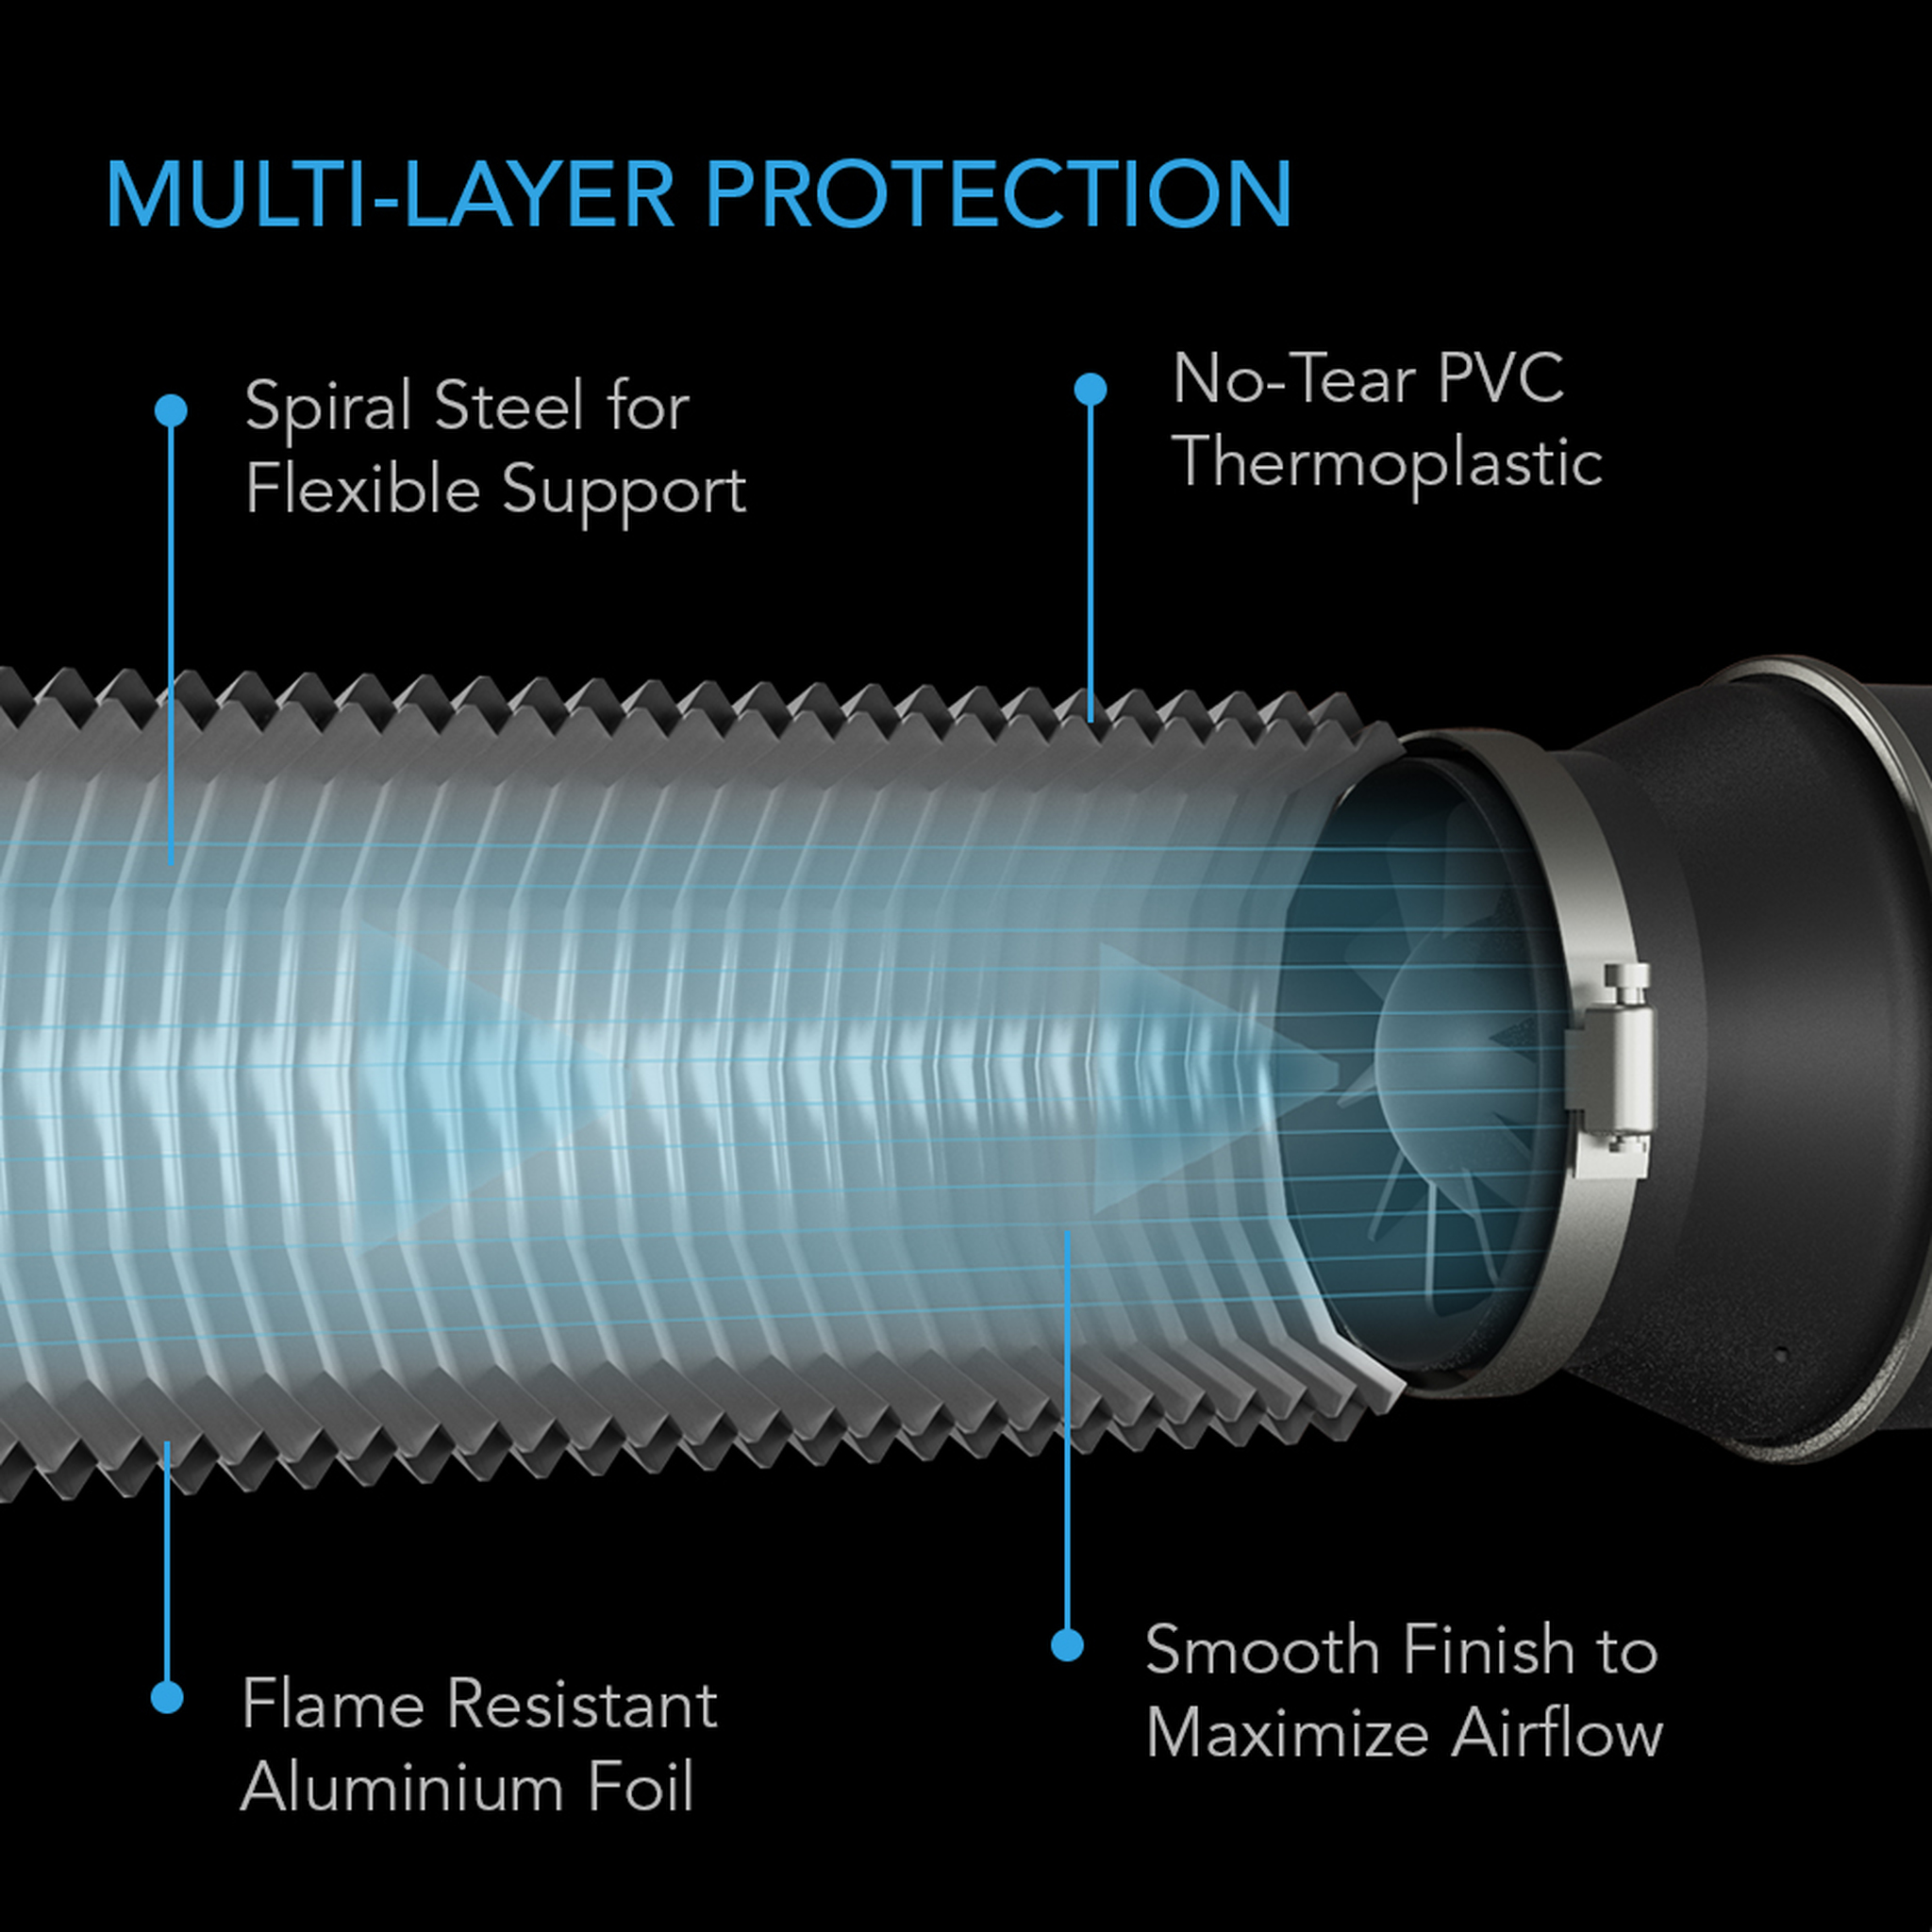 Multi-Layer Protection